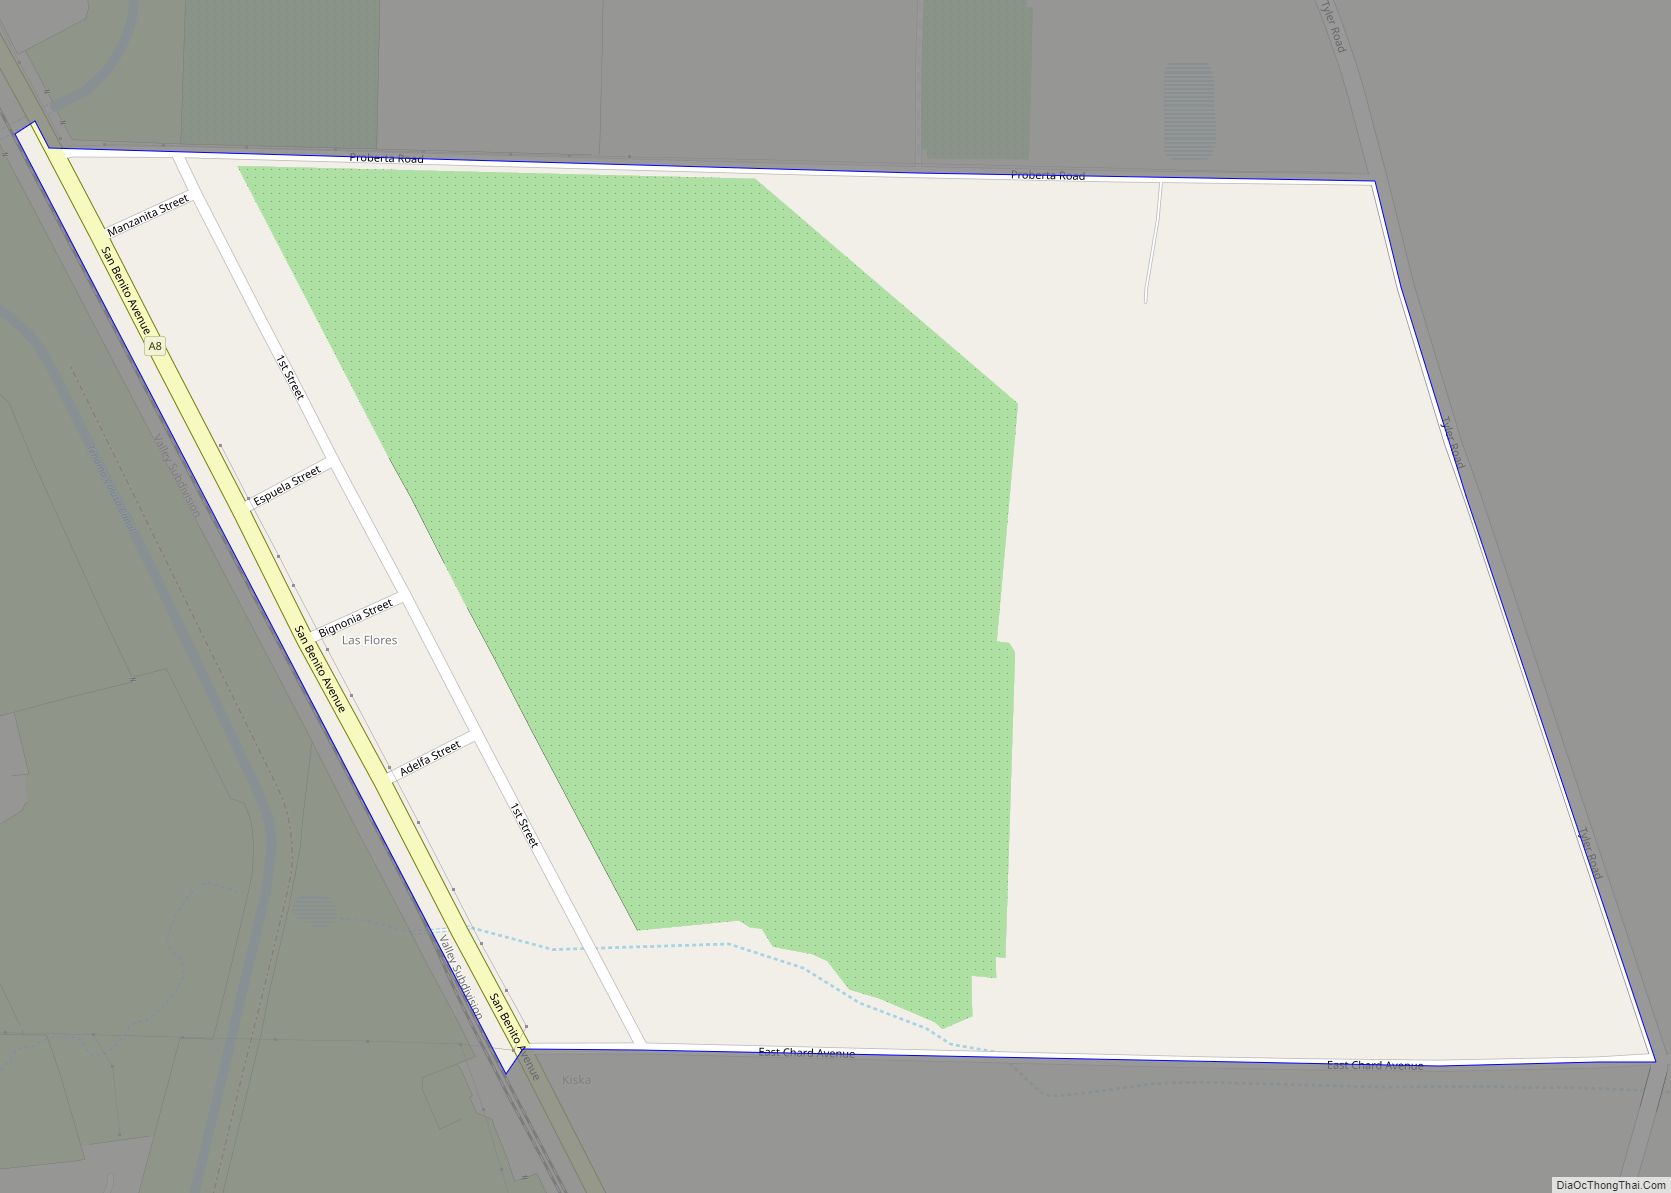 Map of Las Flores CDP